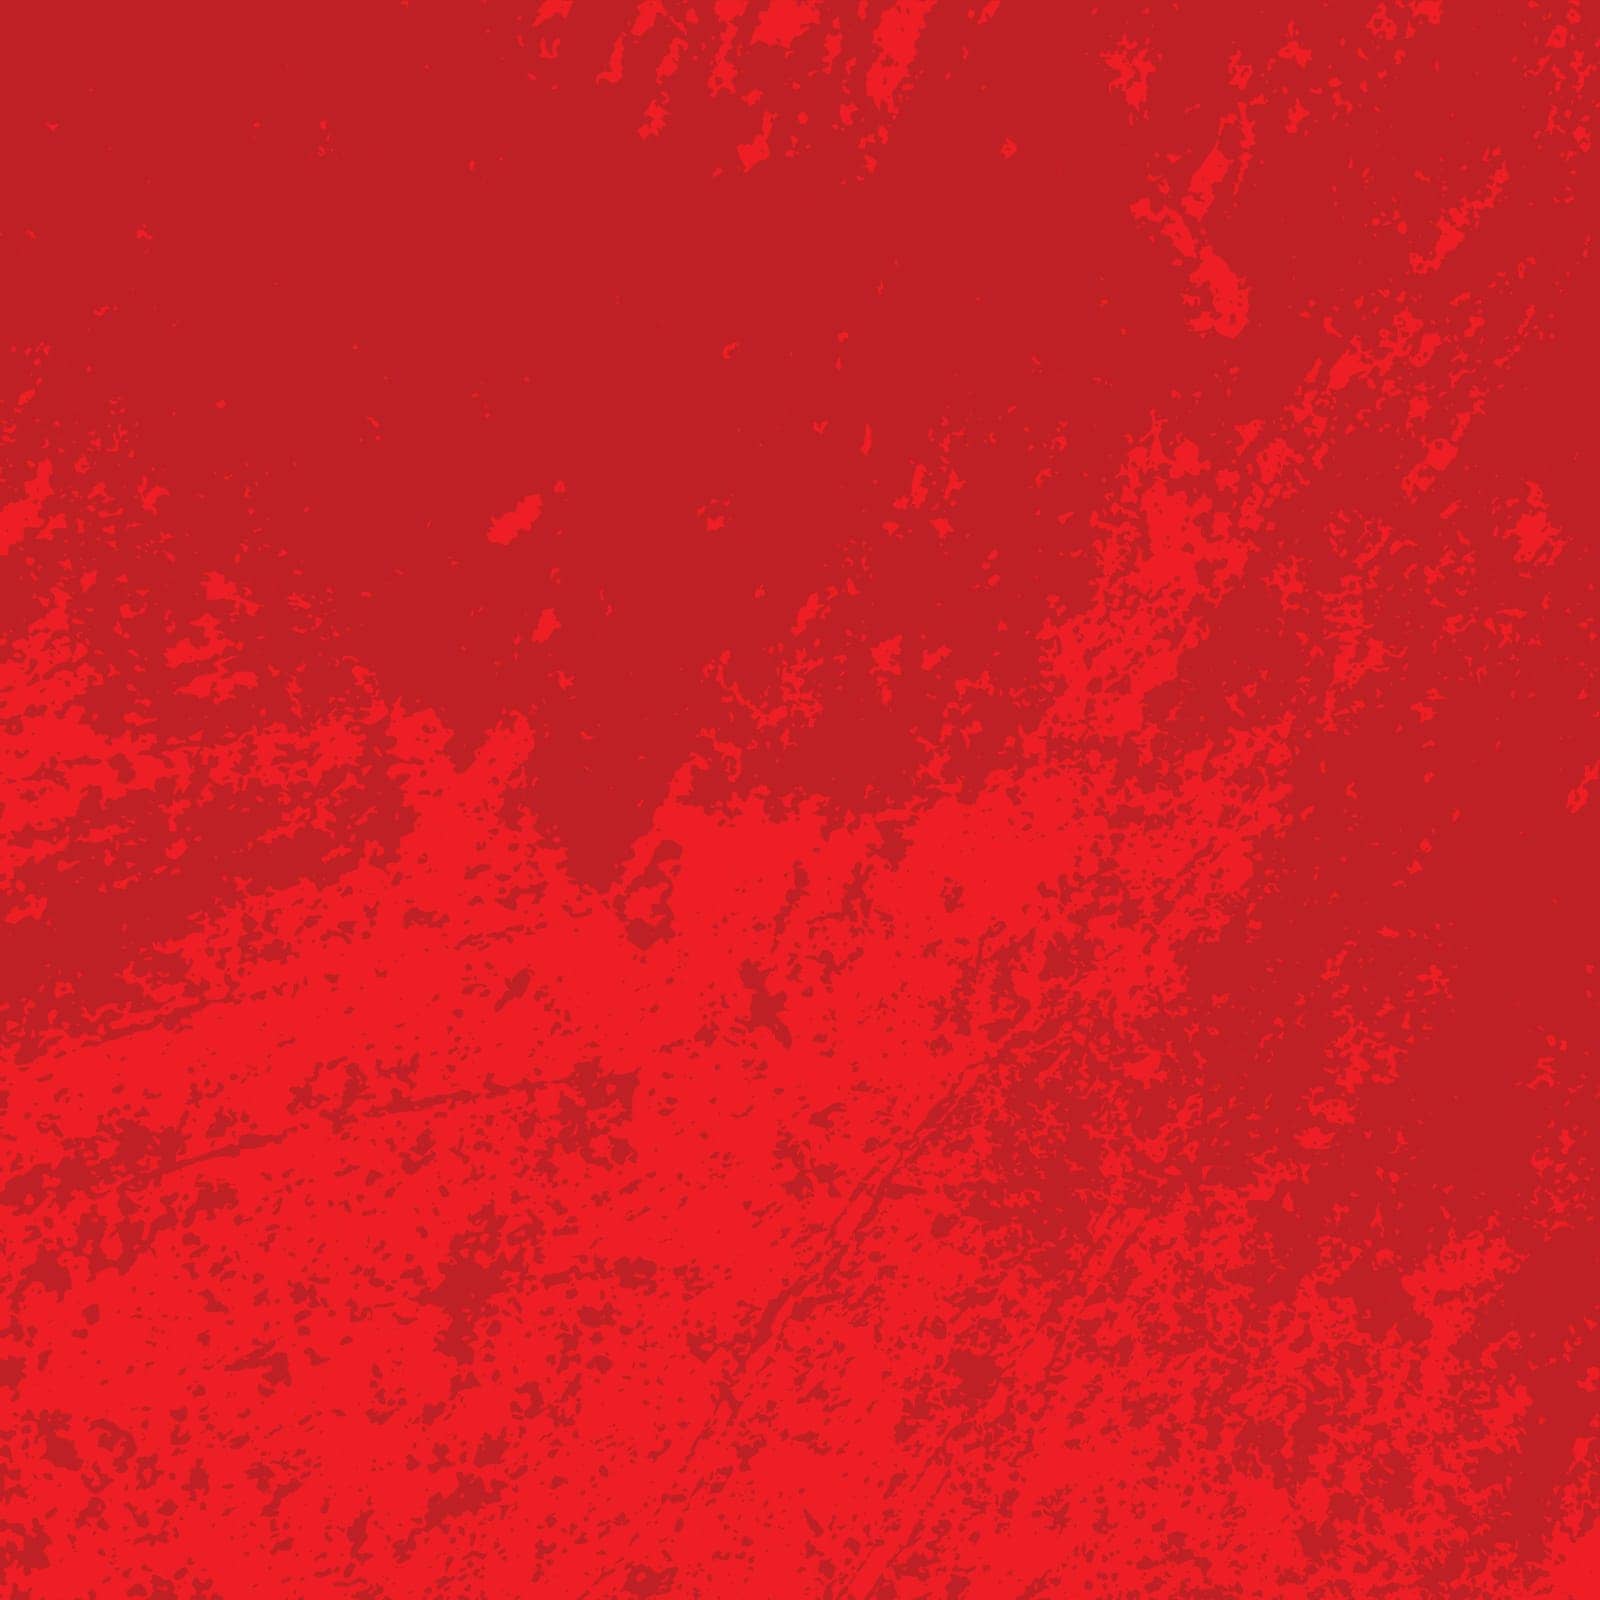 Grunge Red Square Texture For your Design. Empty expressive Distressed Background. EPs10 vector.